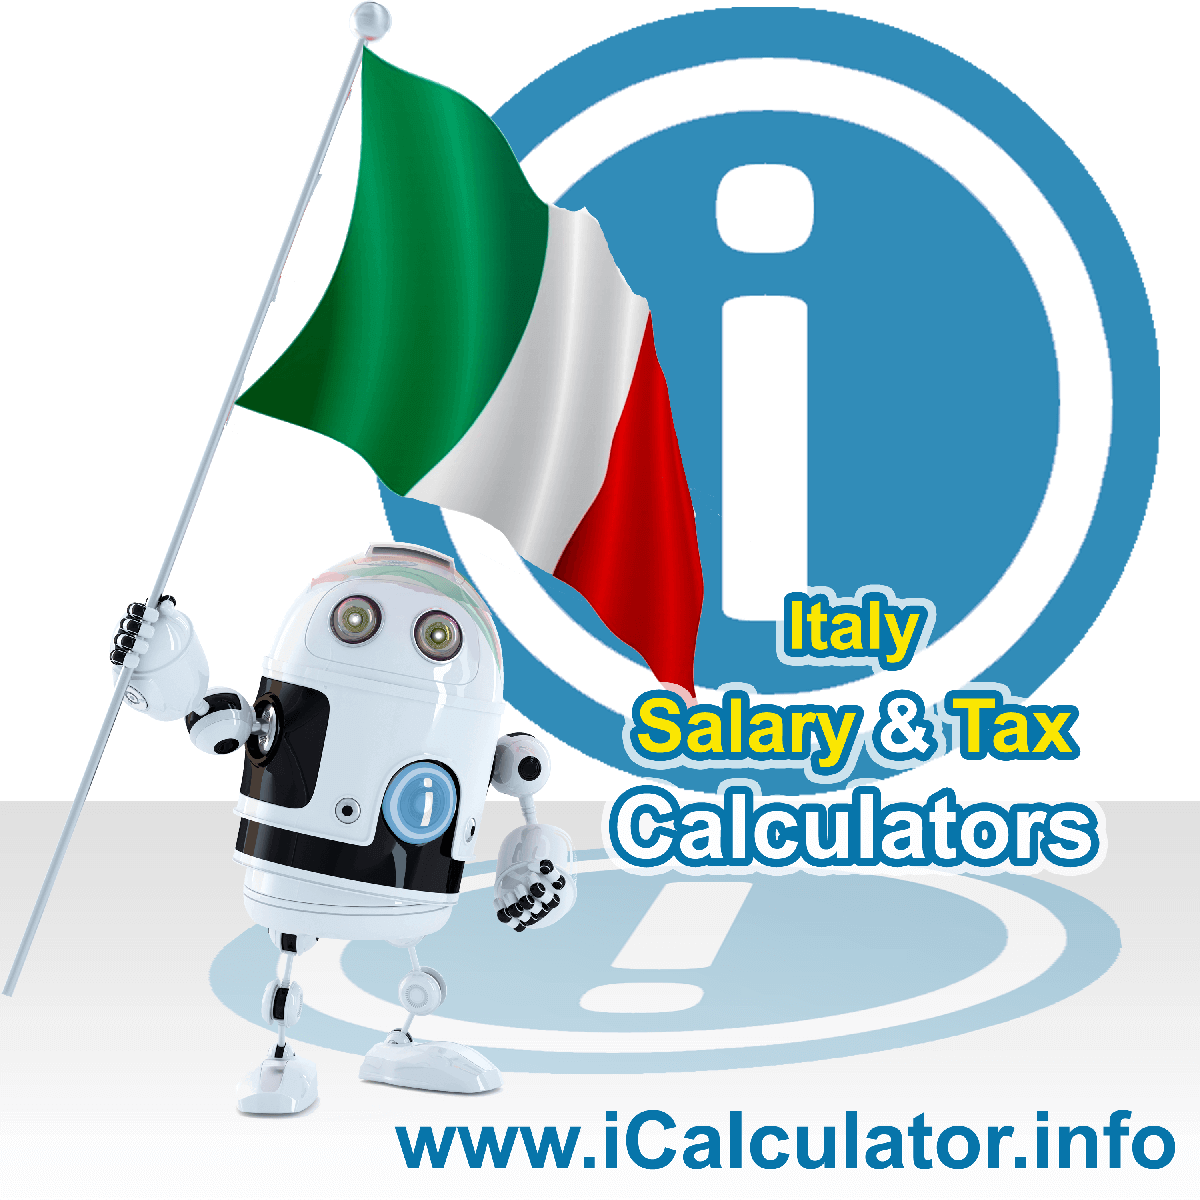 Italy Tax Calculator. This image shows the Italy flag and information relating to the tax formula for the Italy Salary Calculator